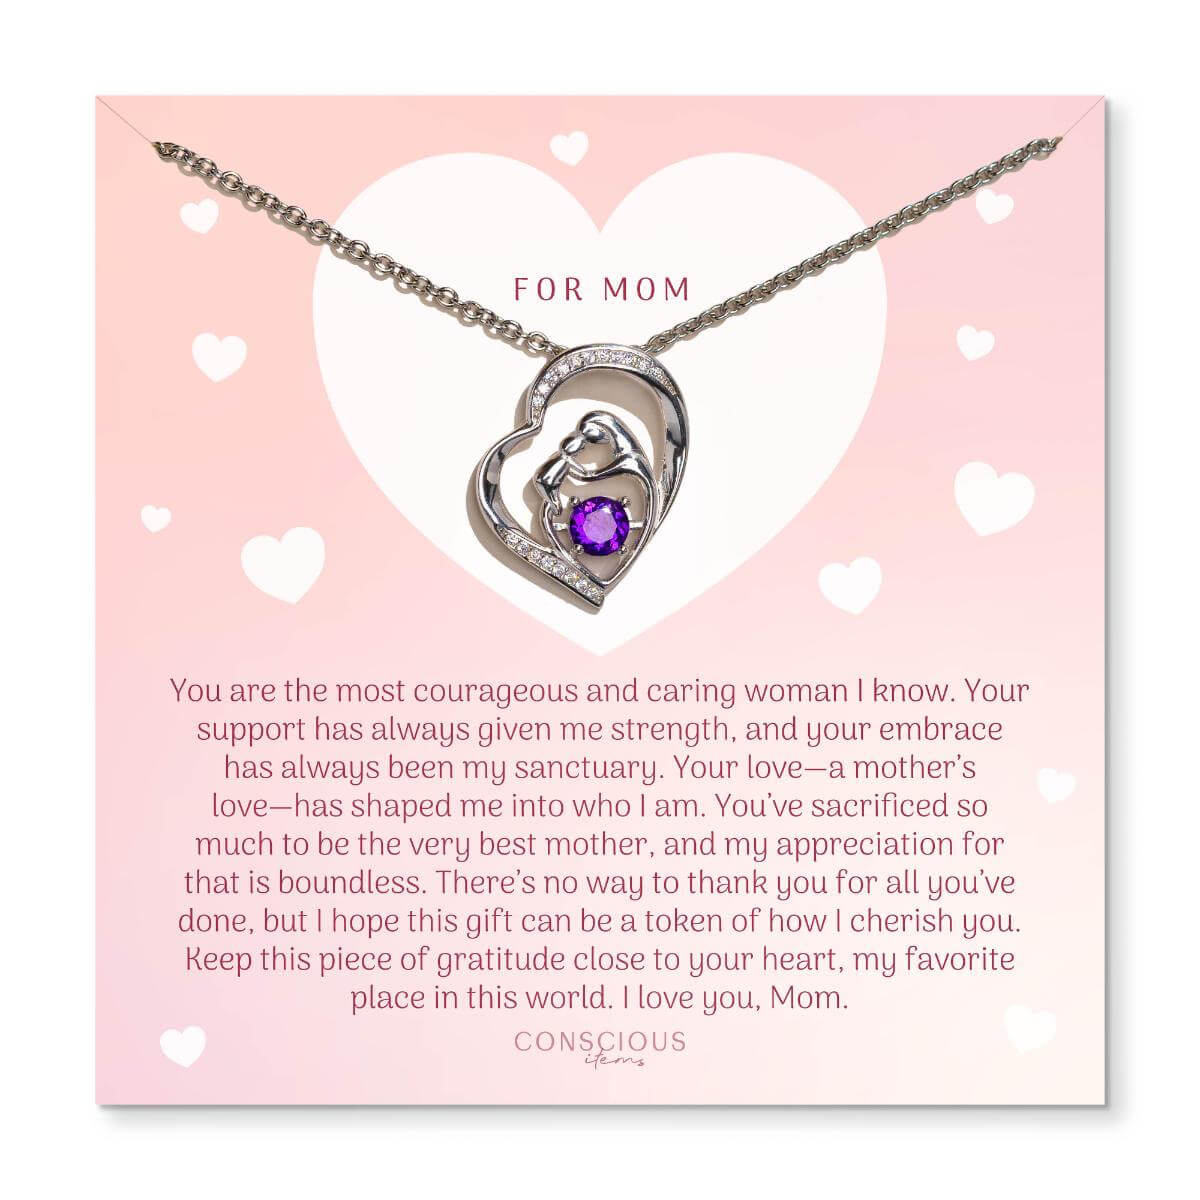 Unbreakable Bond - Mother &amp; Child Crystal Heart Pendant with Amethyst